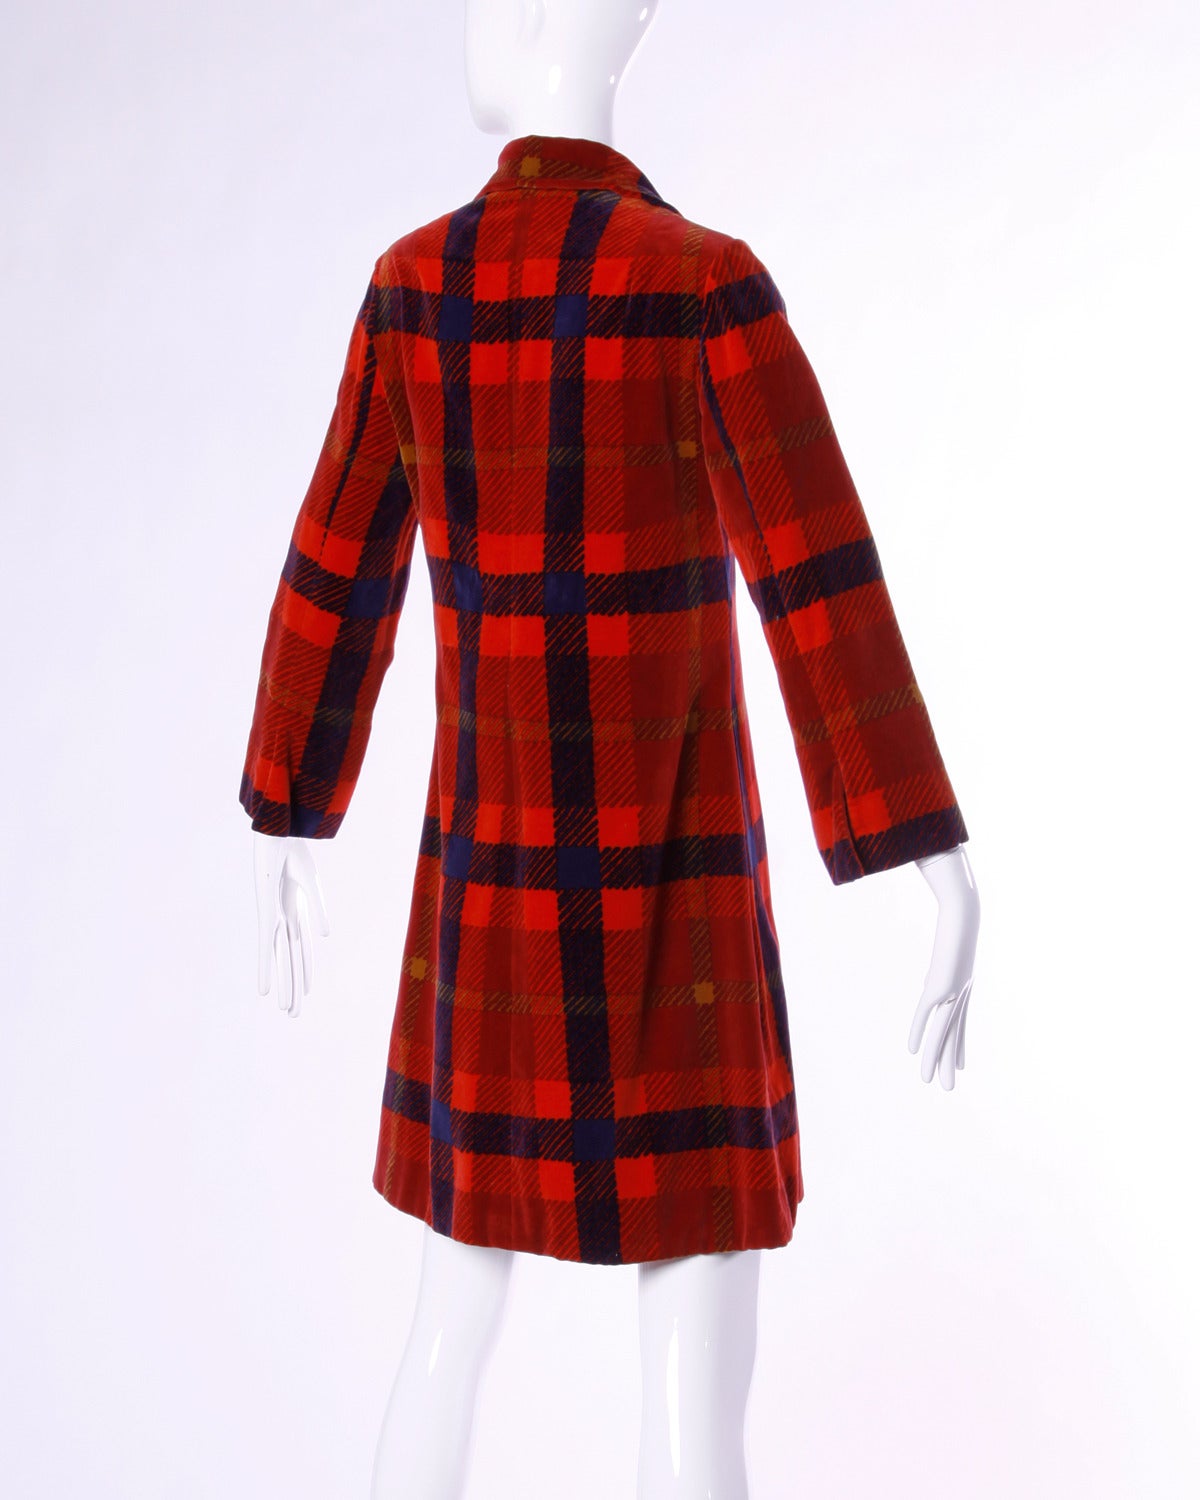 Bill Blass Vintage 1960s 60s Plaid Velvet Coat with Red Lucite Cube Buttons 1